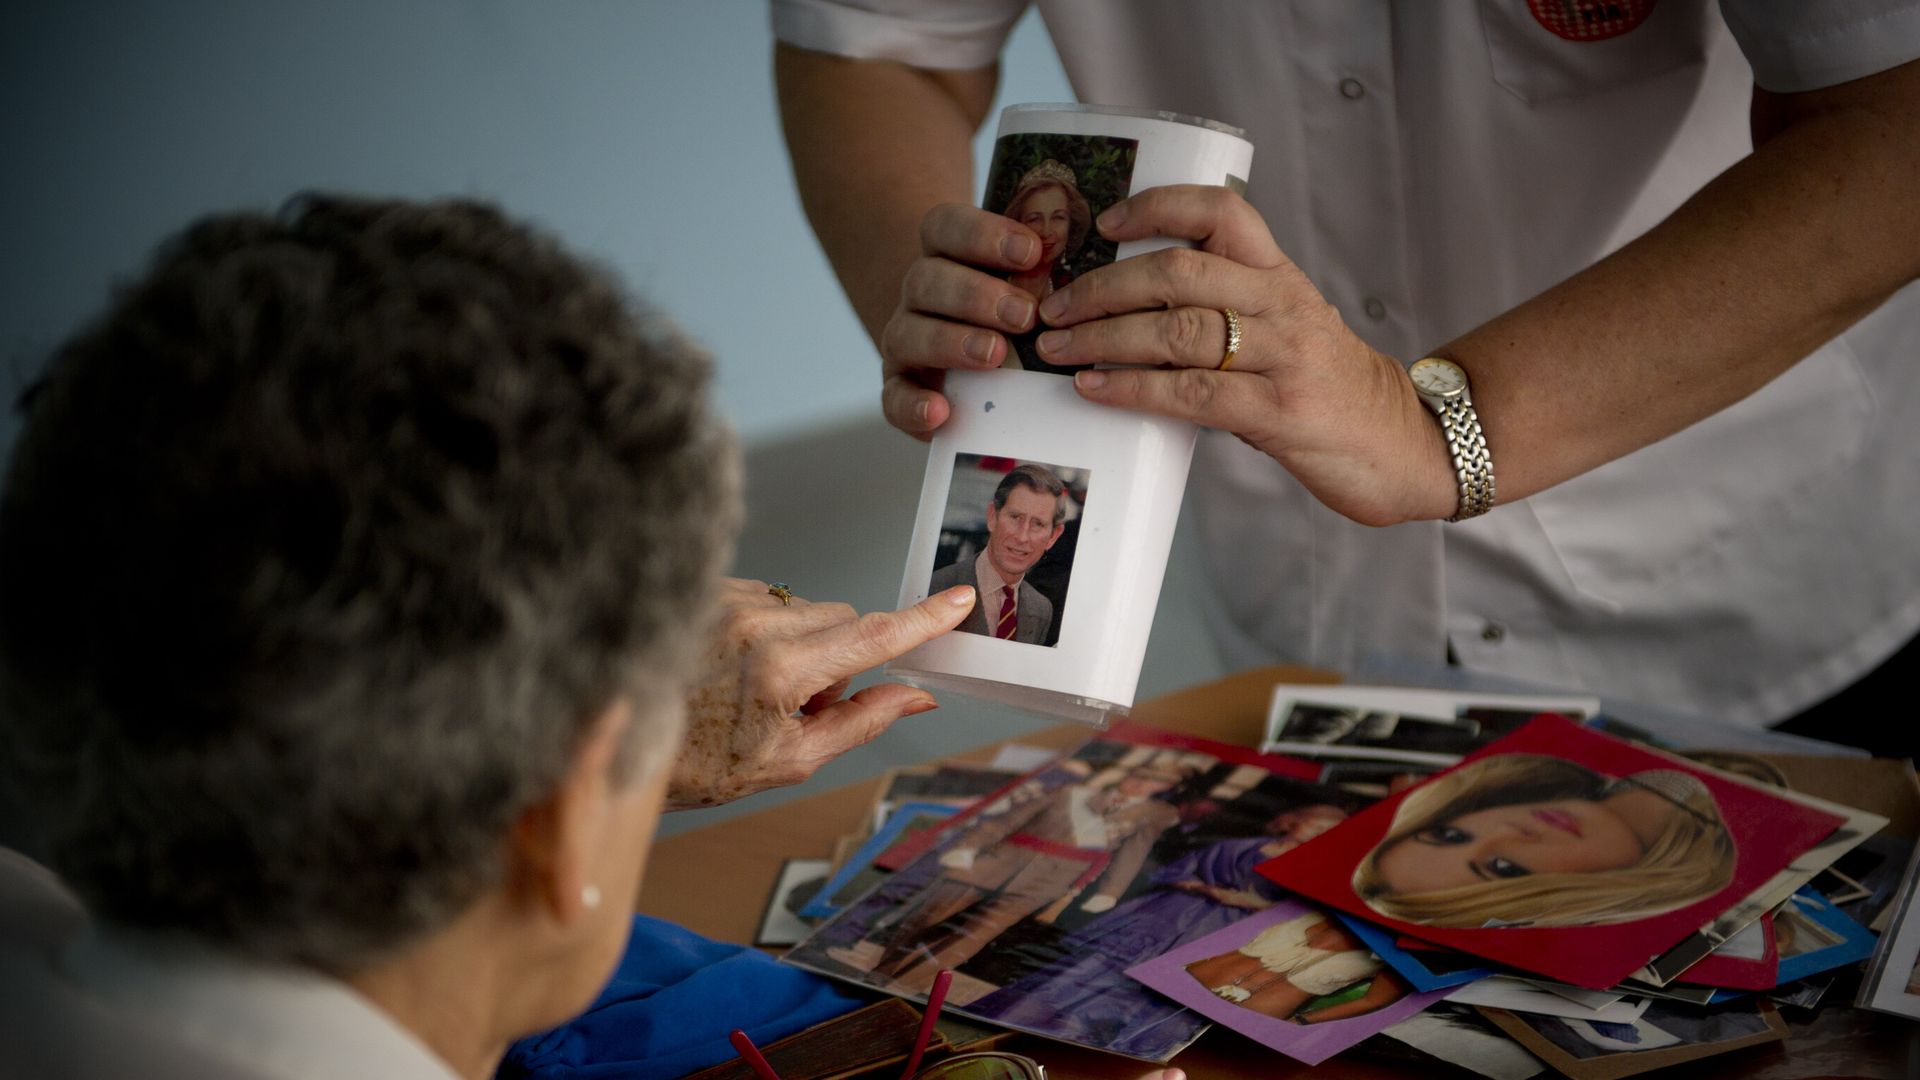 A social worker shows a portrait of Prince Charles, Prince of Wales to an elderly woman during a memory activity on August 2, 2012 in Barcelona, Spain